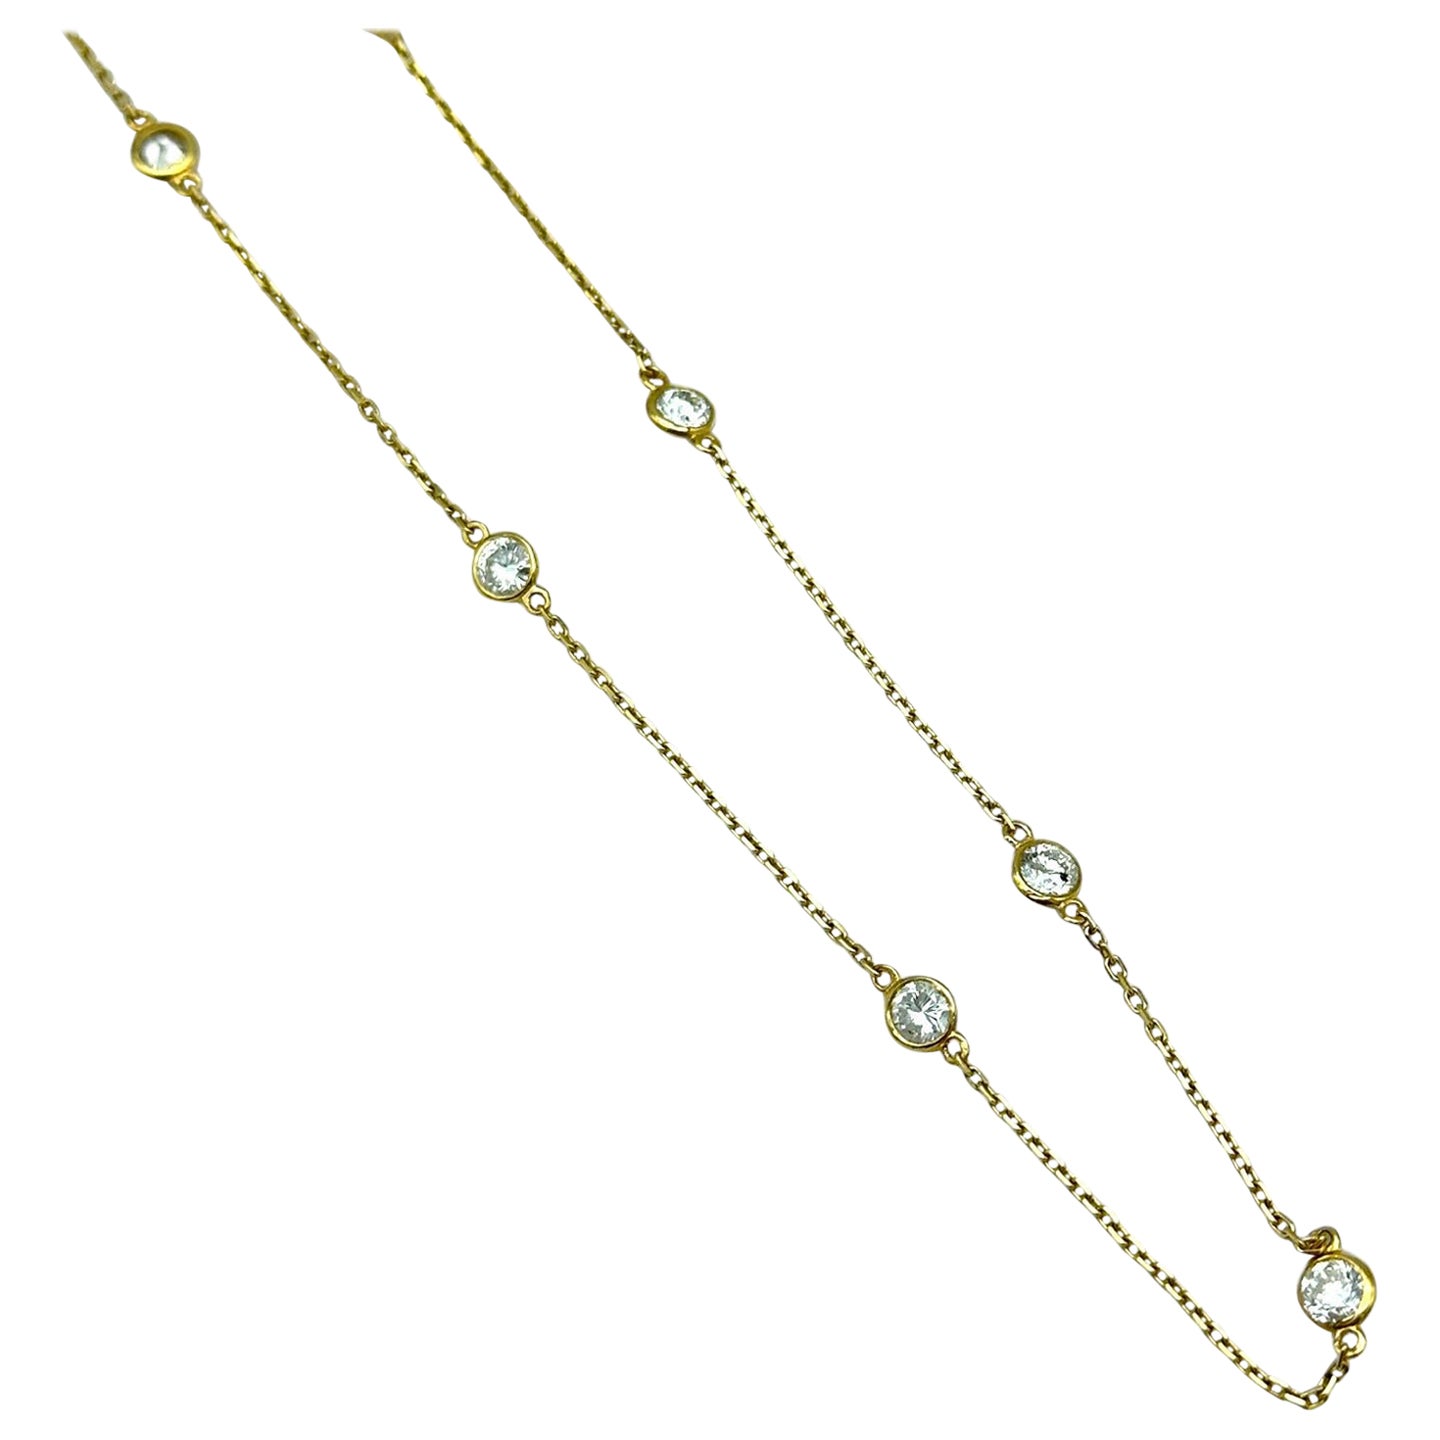 14K 1 3/4 CTW Natural Diamond 7-Station 24" Necklace ( Pink, White or Yellow) For Sale